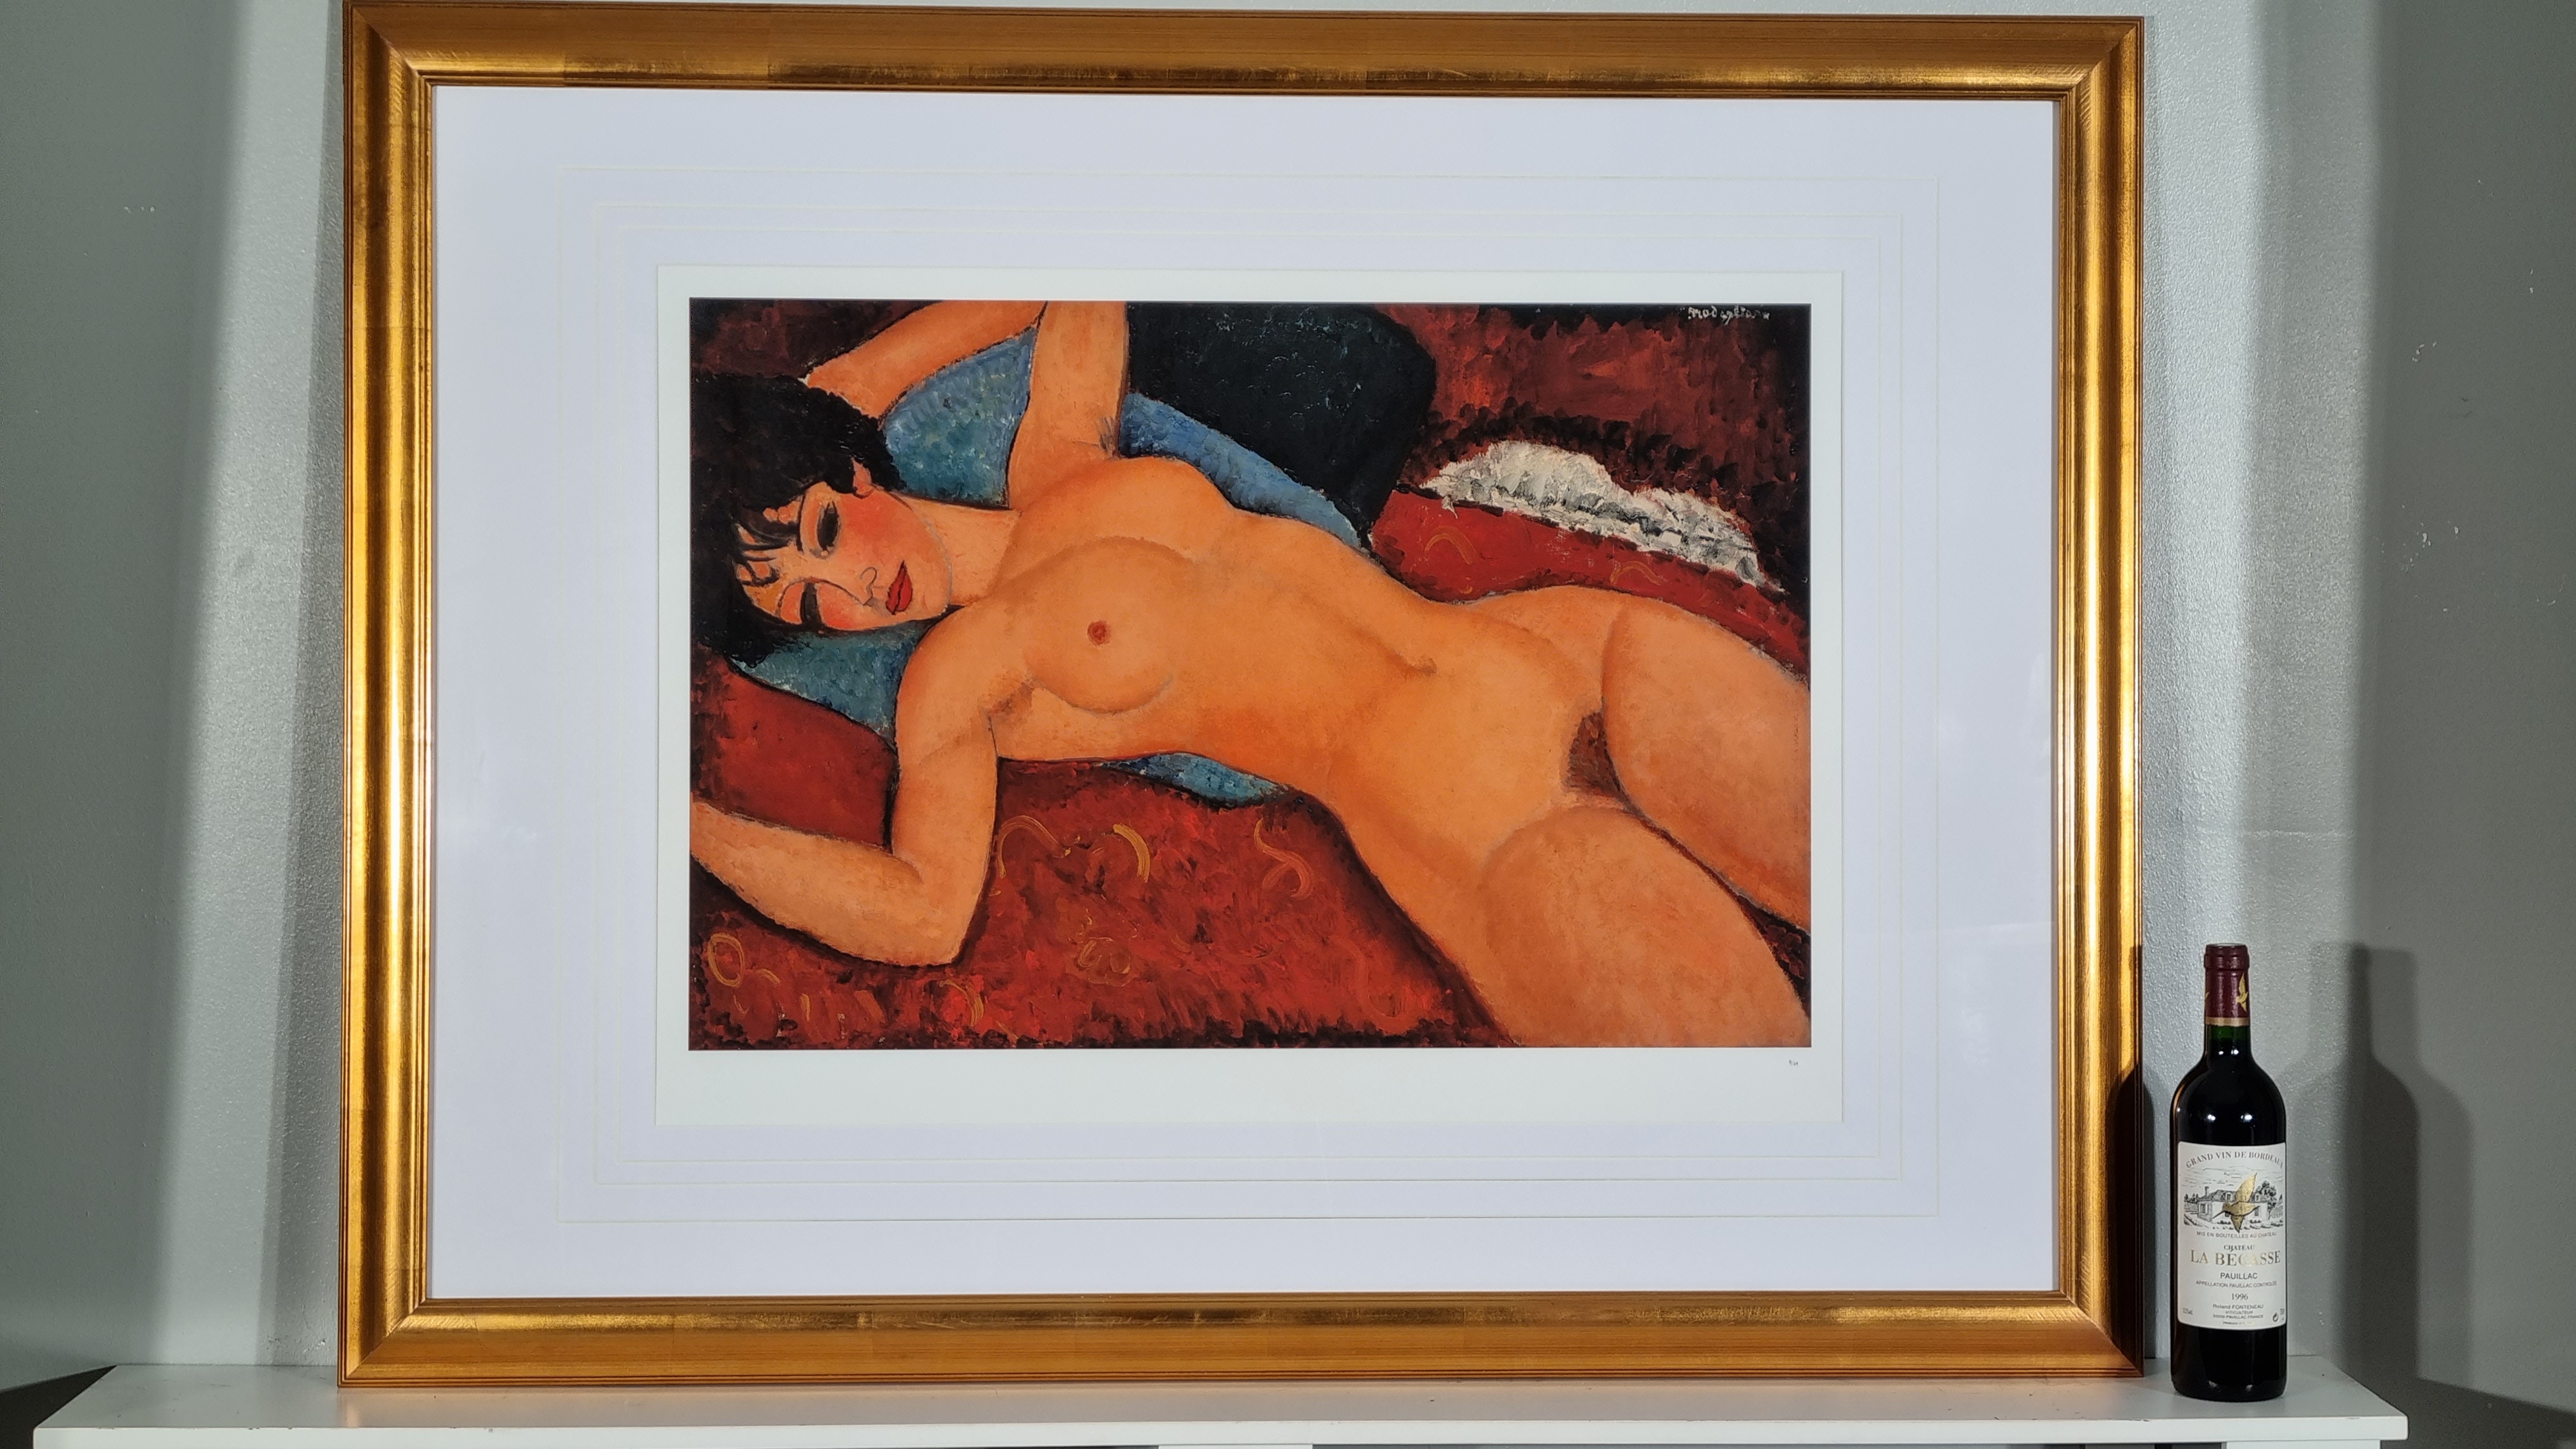 Limited Edition by Amedeo Modigliani - Image 2 of 4